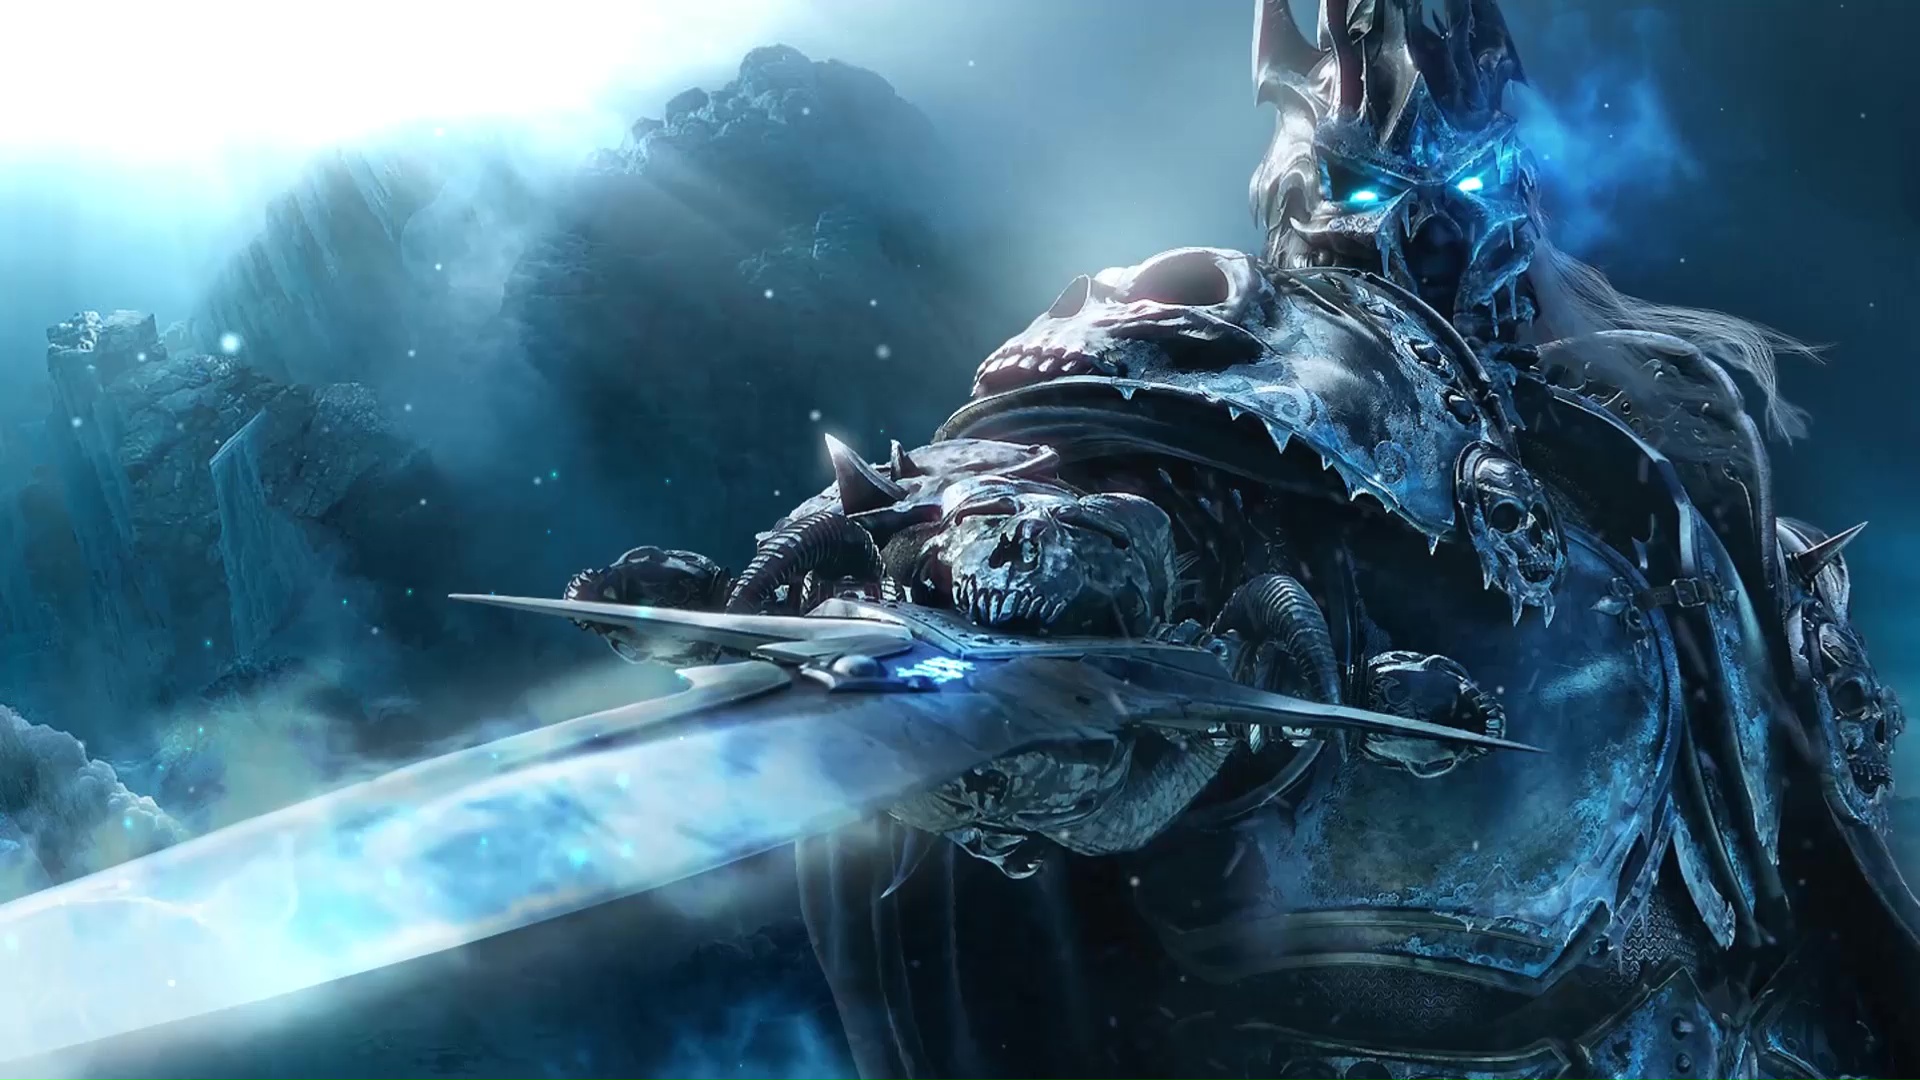 Lich King World Of Warcraft: Wrath Of The Lich King Live Wallpaper -  MoeWalls